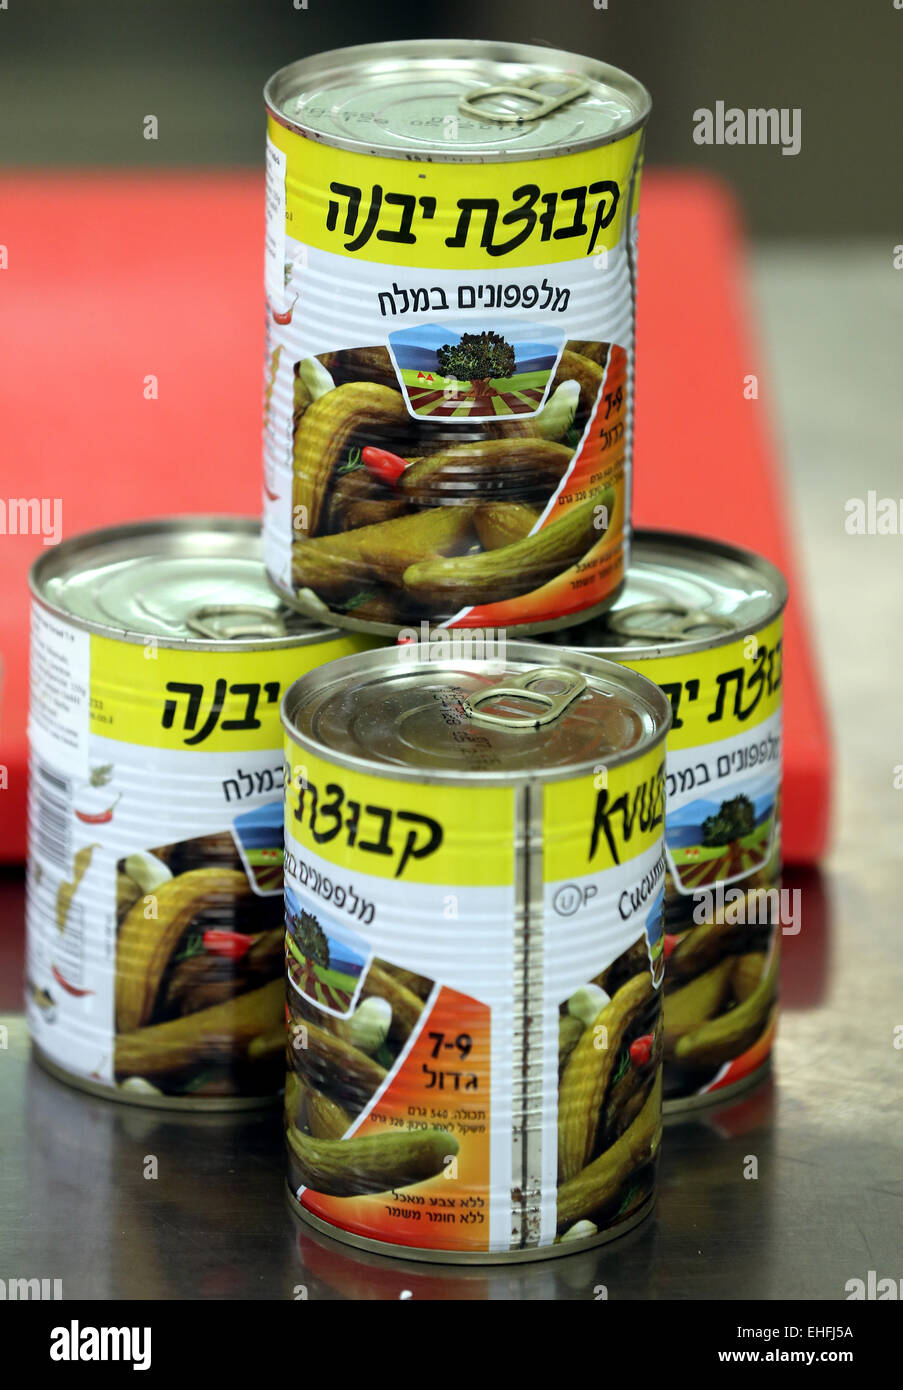 Berlin, Germany. 13th Mar, 2015. Cans of gherkins during a press conference before the demonstration of food preparation for the Chabad Jewish educational center Kosher Festival in the Hotel Interconti in Berlin, Germany, 13 March 2015. Photo: WOLFGANG KUMM/dpa/Alamy Live News Stock Photo